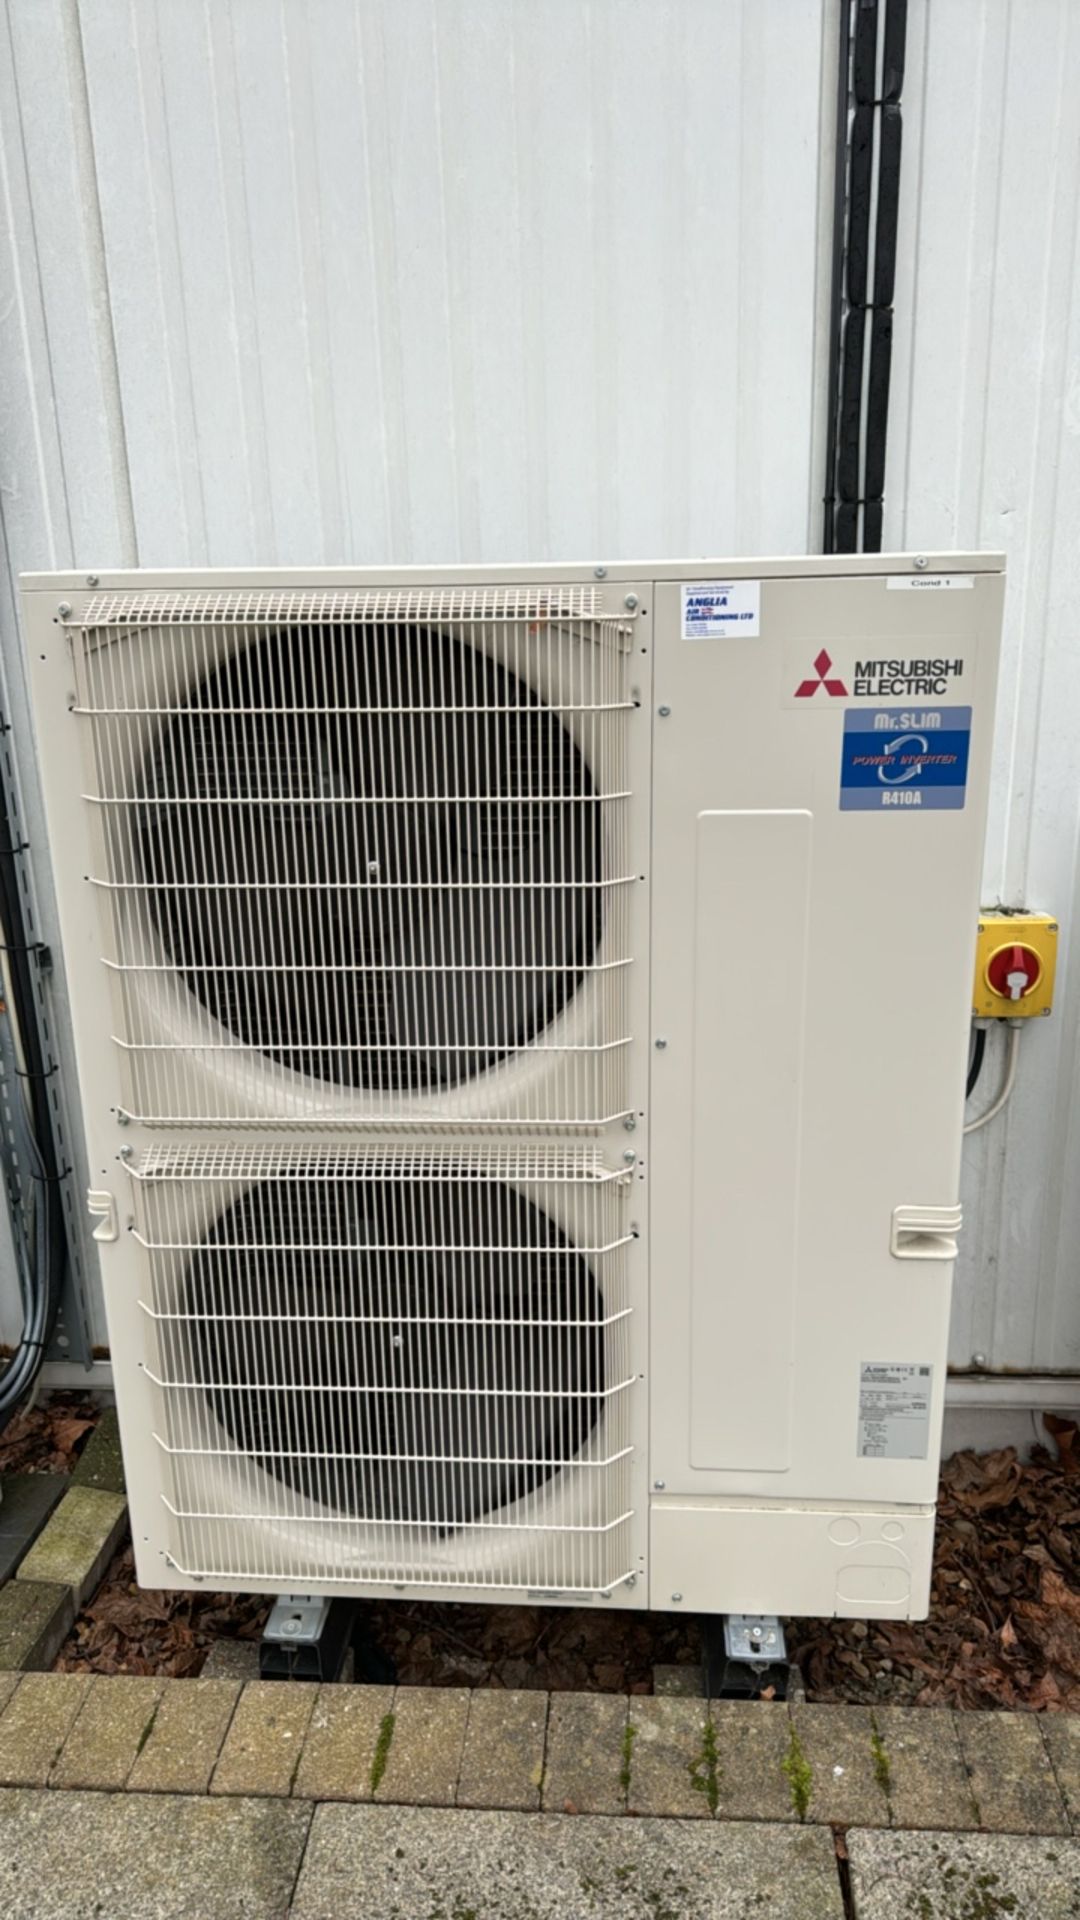 Mitsubishi Electric Air Conditioner - Image 2 of 3